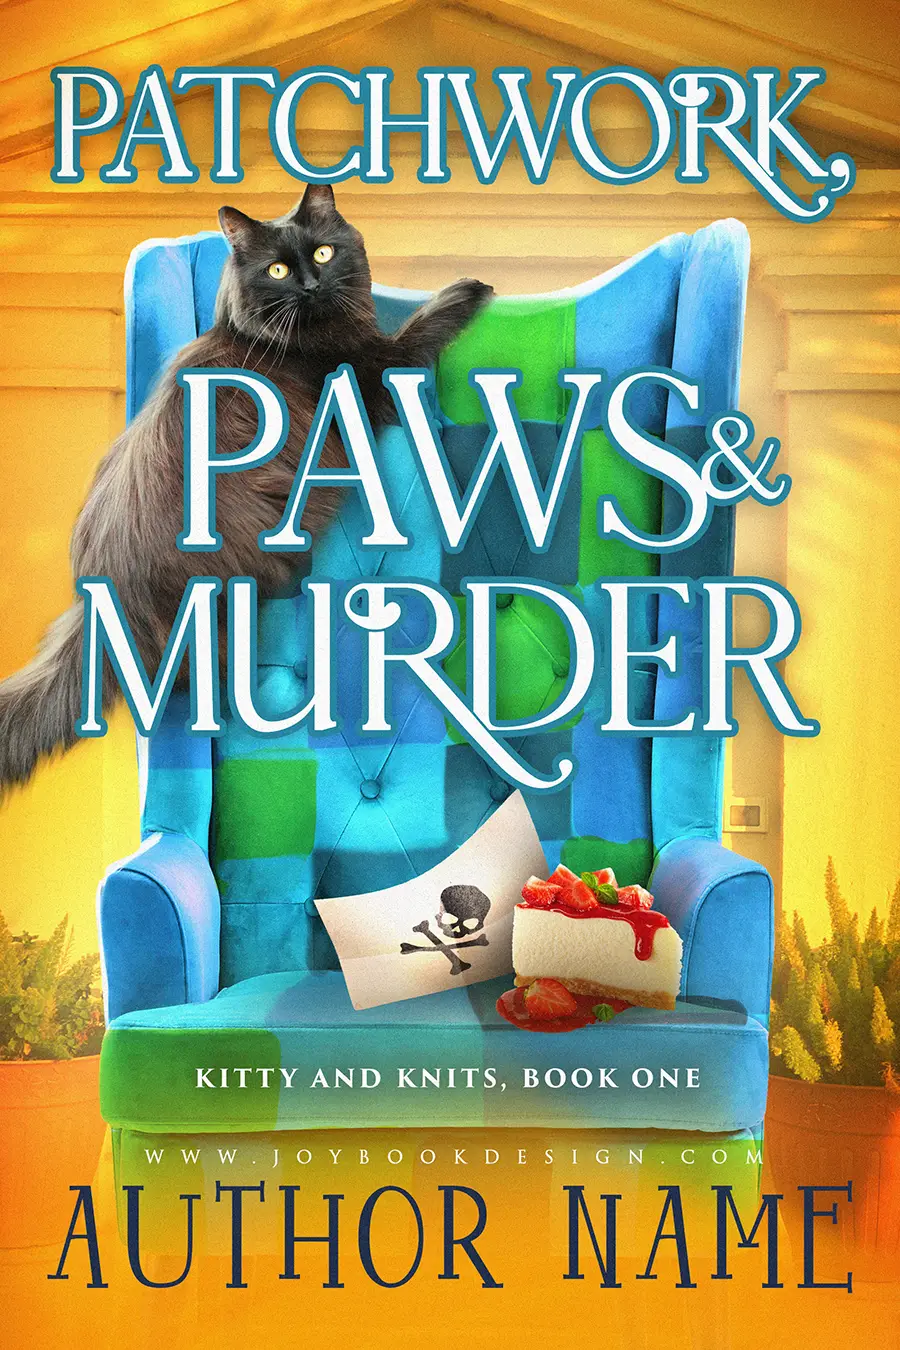 Patchwork Paws & Murders